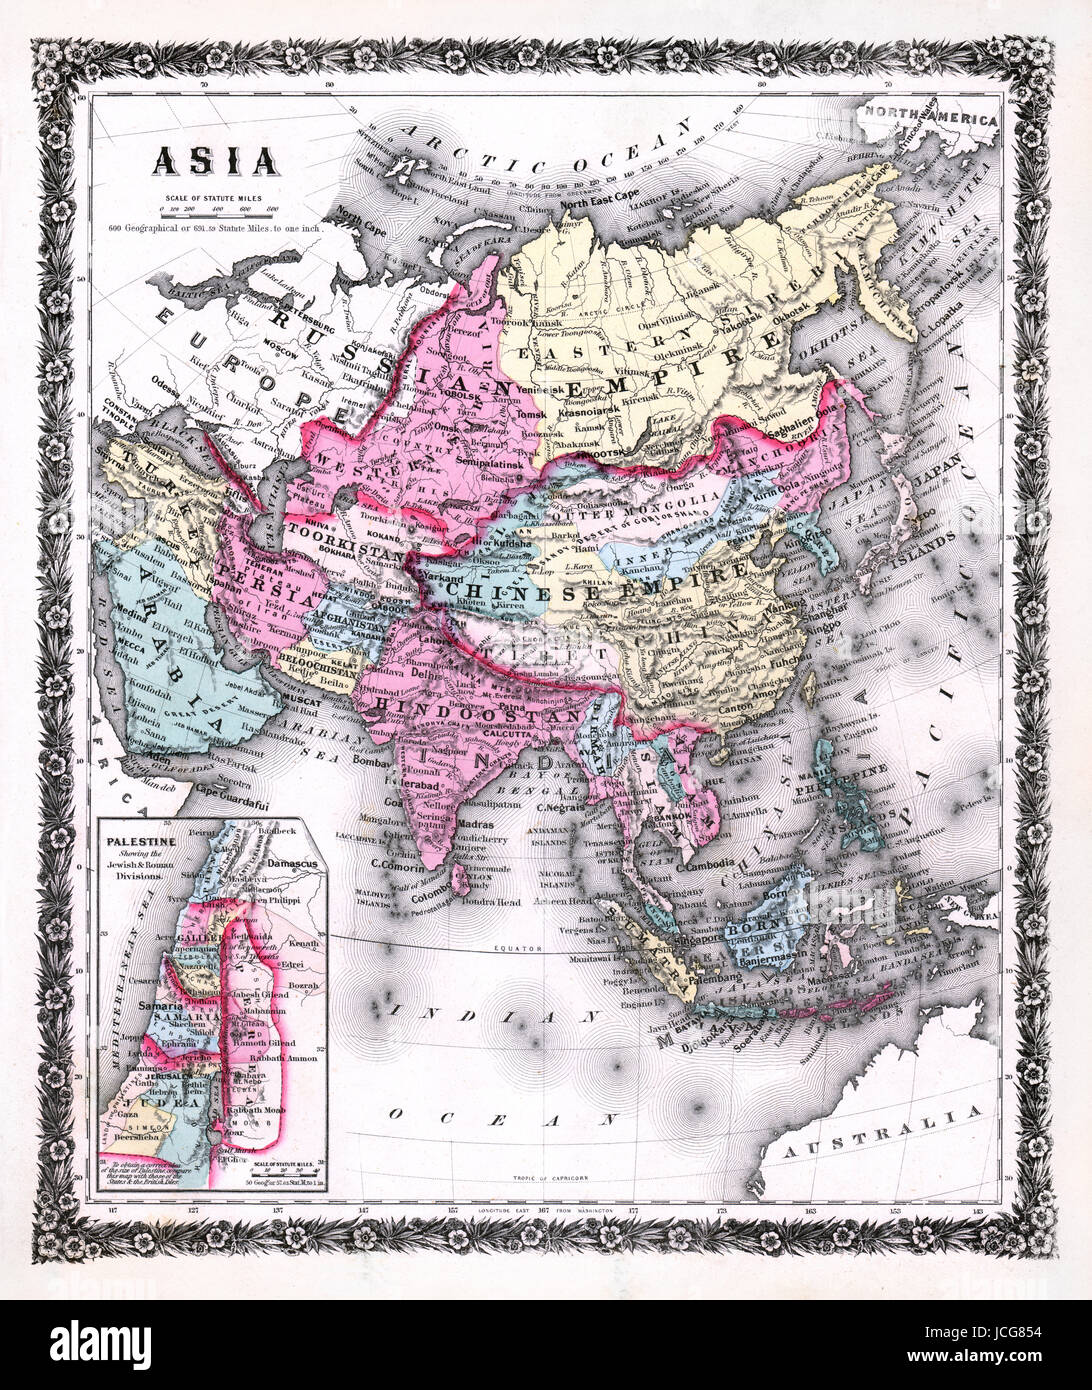 1858 Colton Map of Asia including the Middle East and East Indies, India, the Chinese Empire, Japan, Arabia, Palestine and other places. Stock Photo